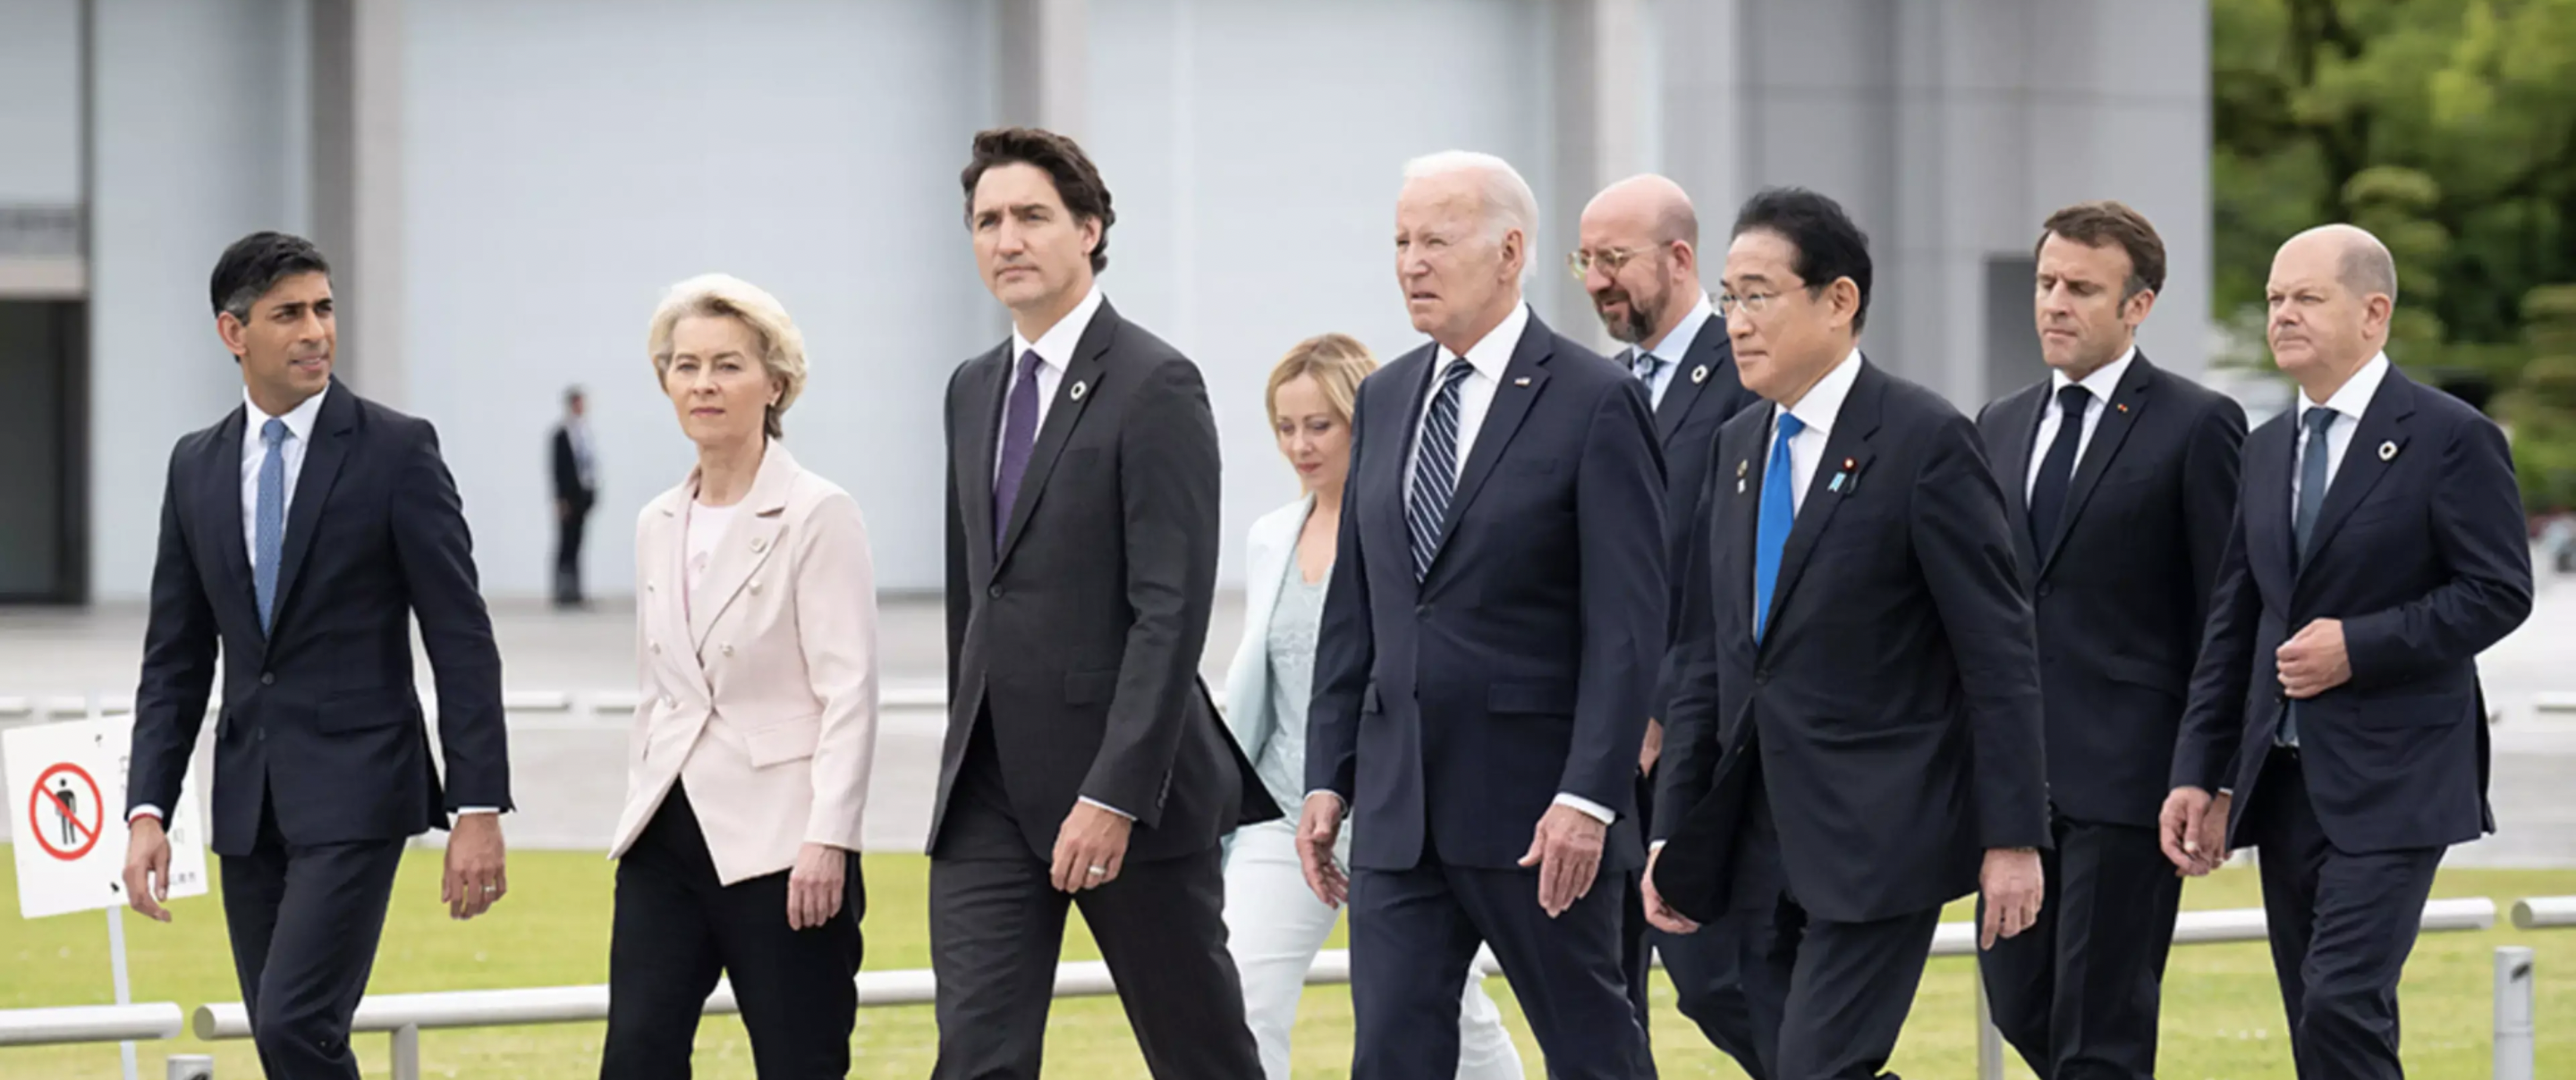 Can predictive AI improve the efficacy of the G7?